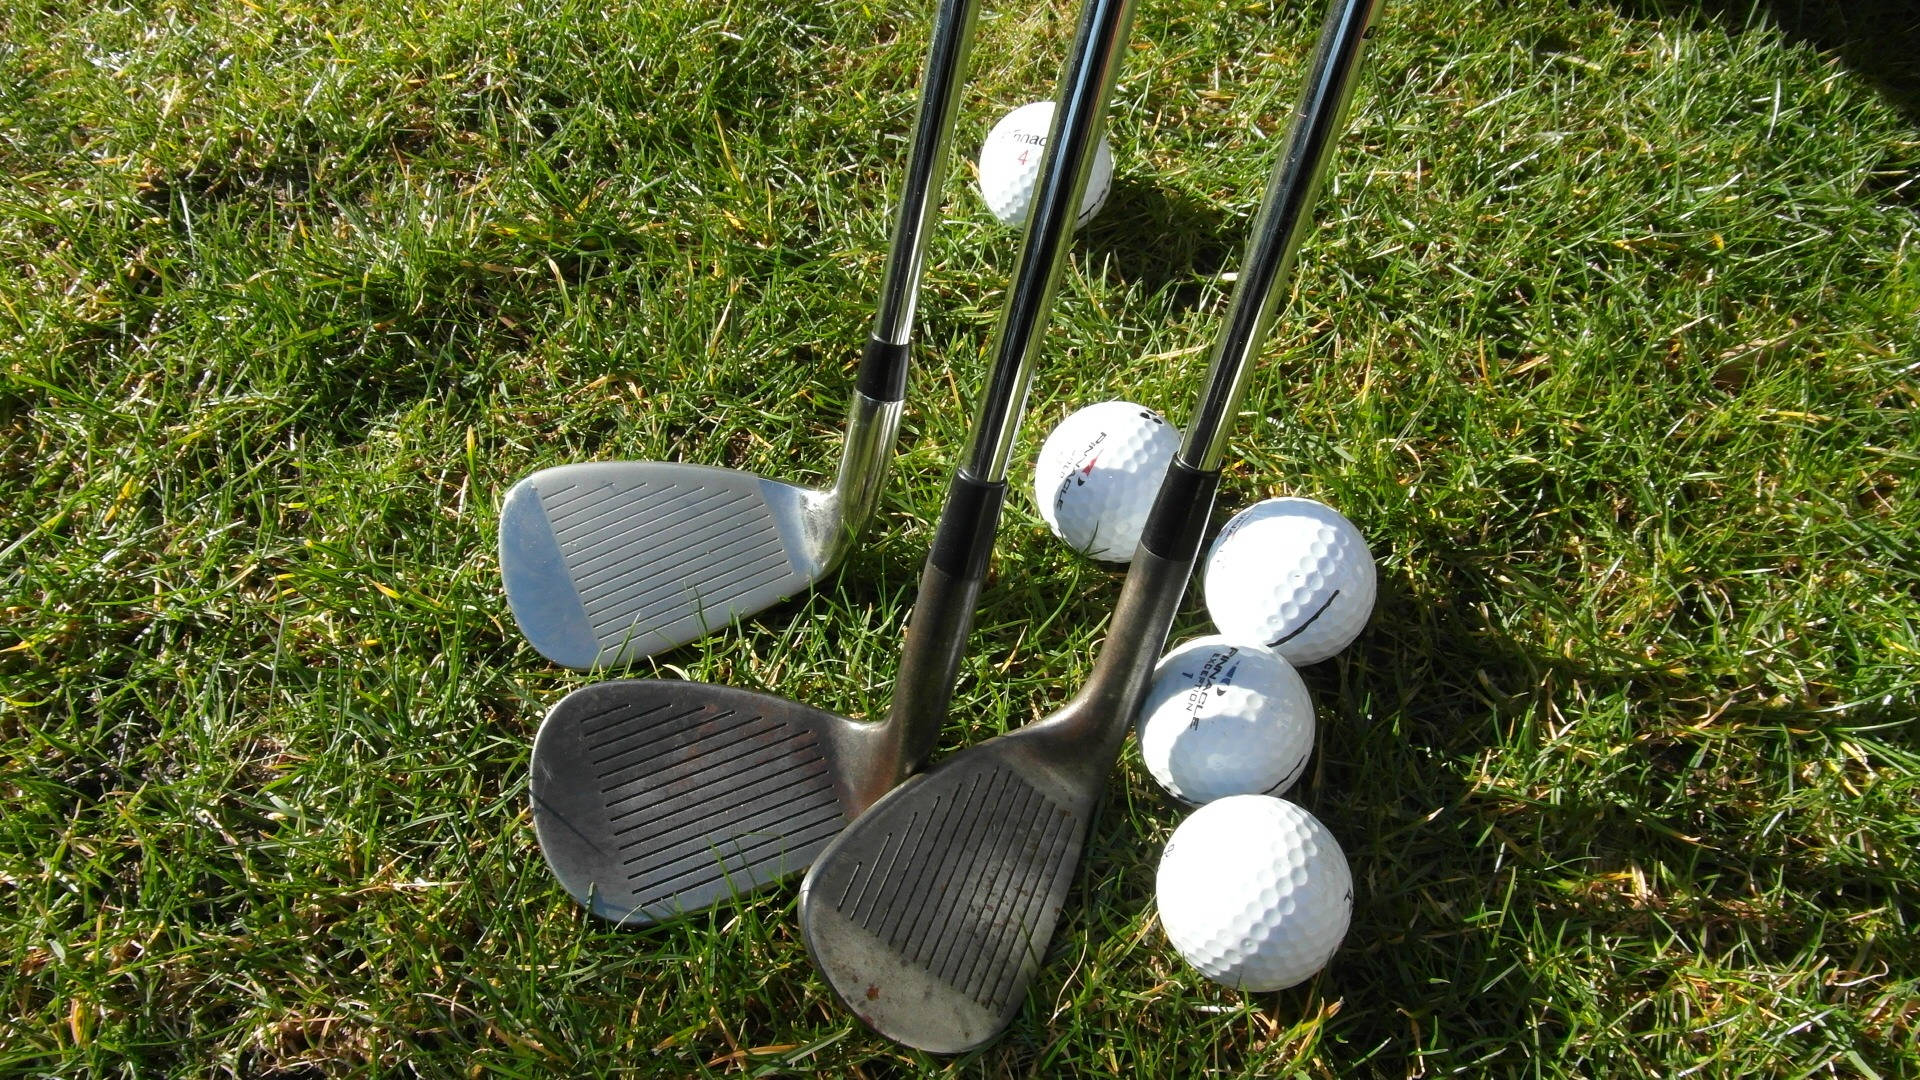 Golf Club Heads And Balls On Golf Course Wallpaper